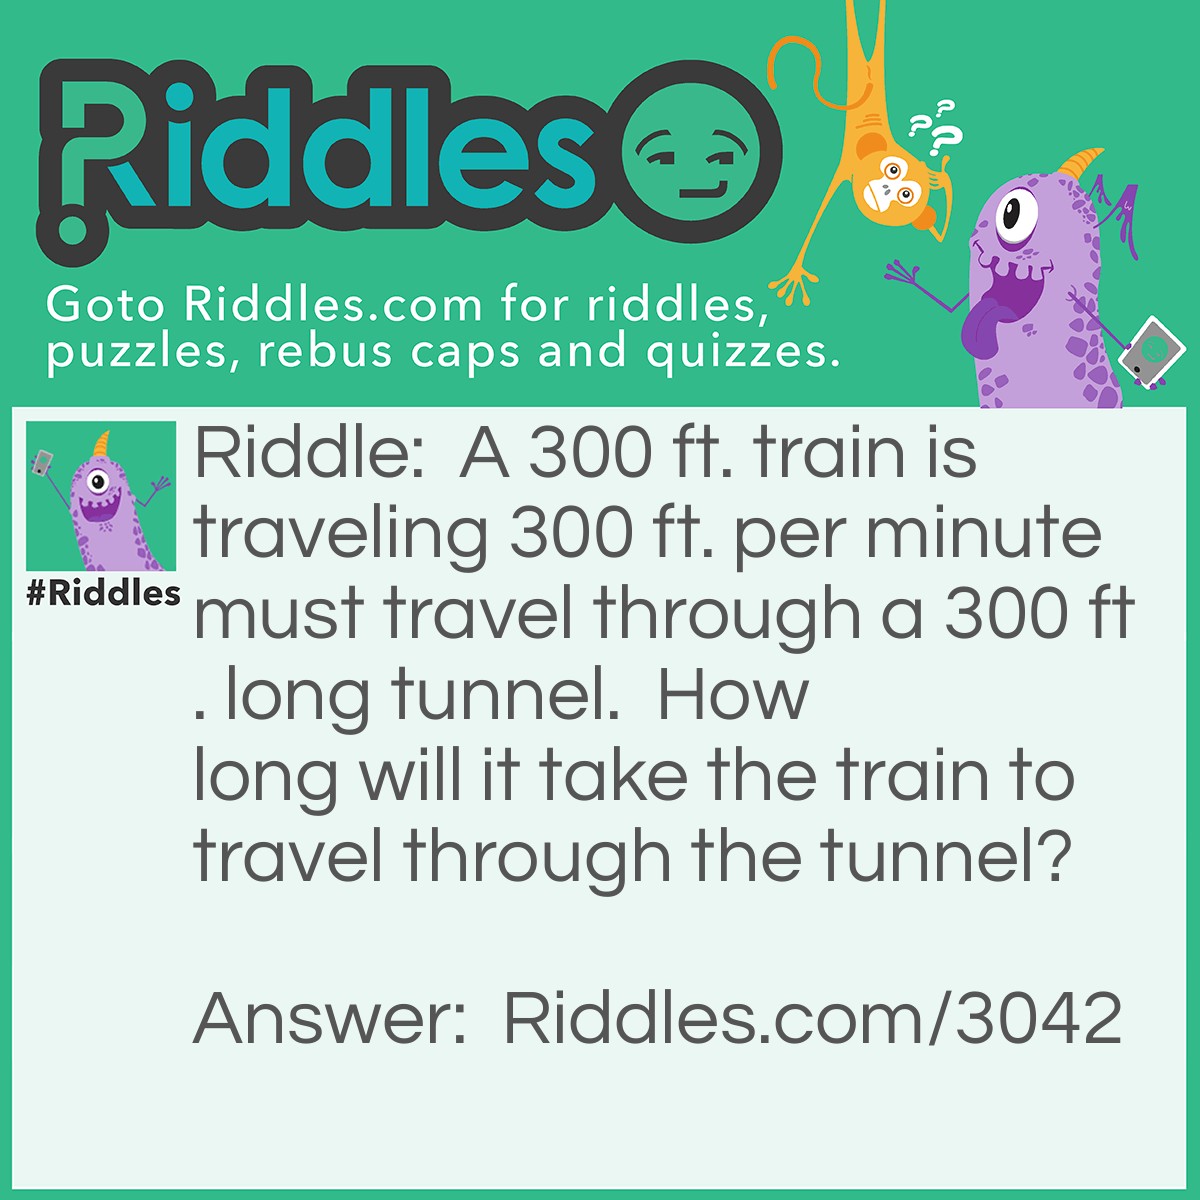 Riddle: A 300 ft. train is traveling 300 ft. per minute must travel through a 300 ft. long tunnel.  How long will it take the train to travel through the tunnel? Answer: Two minutes. It takes the front of the train one minute and the rest of the train will take two minutes to clear the tunnel.